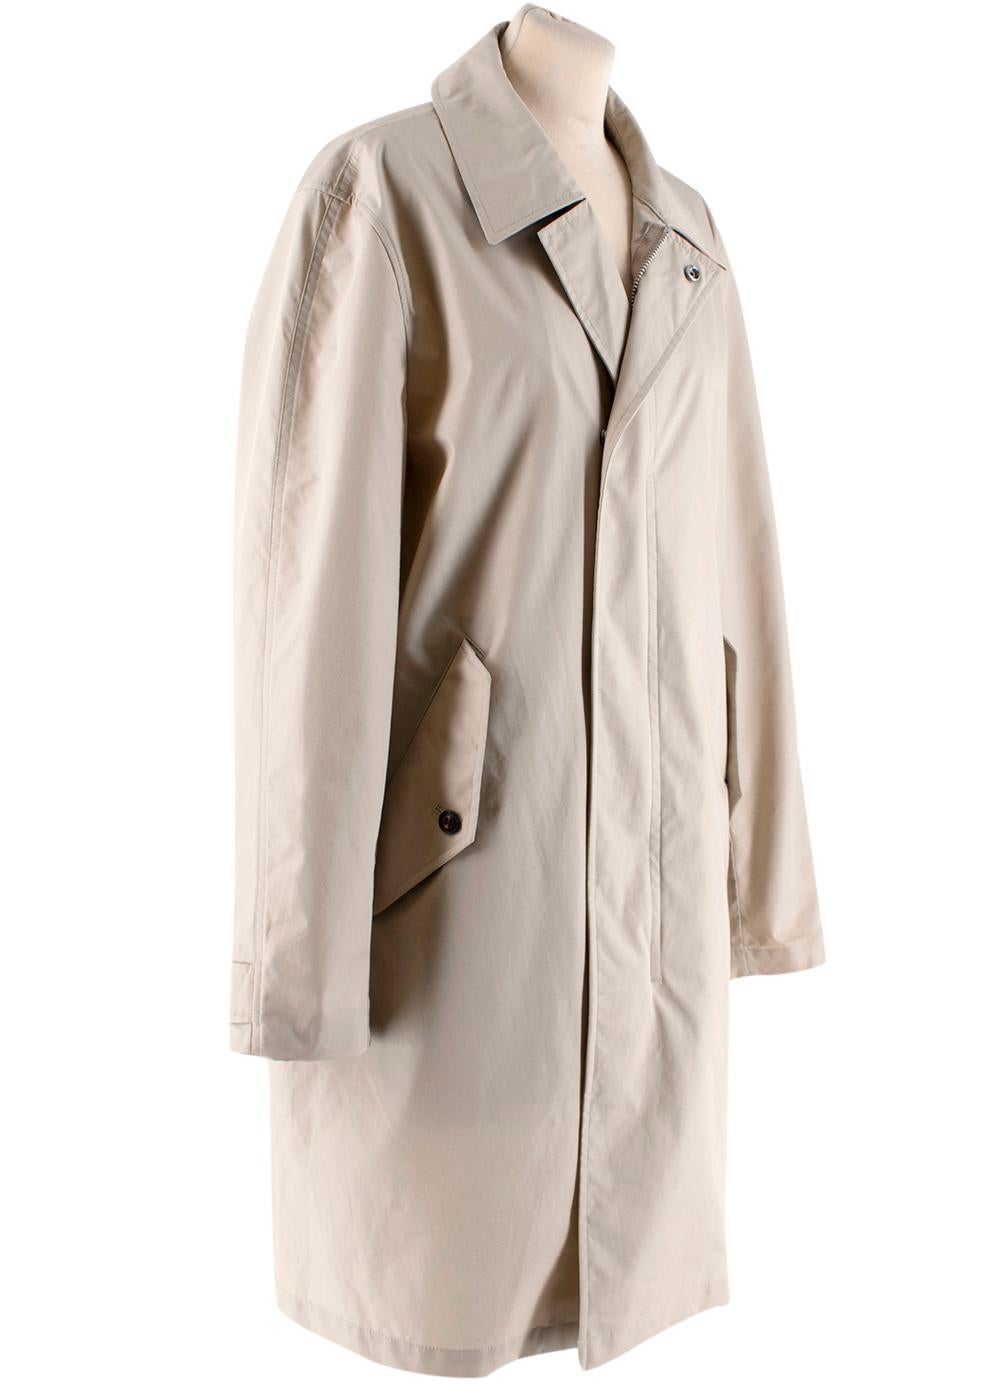 Burberry Stone Zip Trench Coat with Detachable Hood

- Two side button welt pockets 
- Classic, timeless cut
- Single breasted closure with a zip and press-studs
- Signature details: check undercollar
- One inside pocket 

Materials: 
Outer - 100%